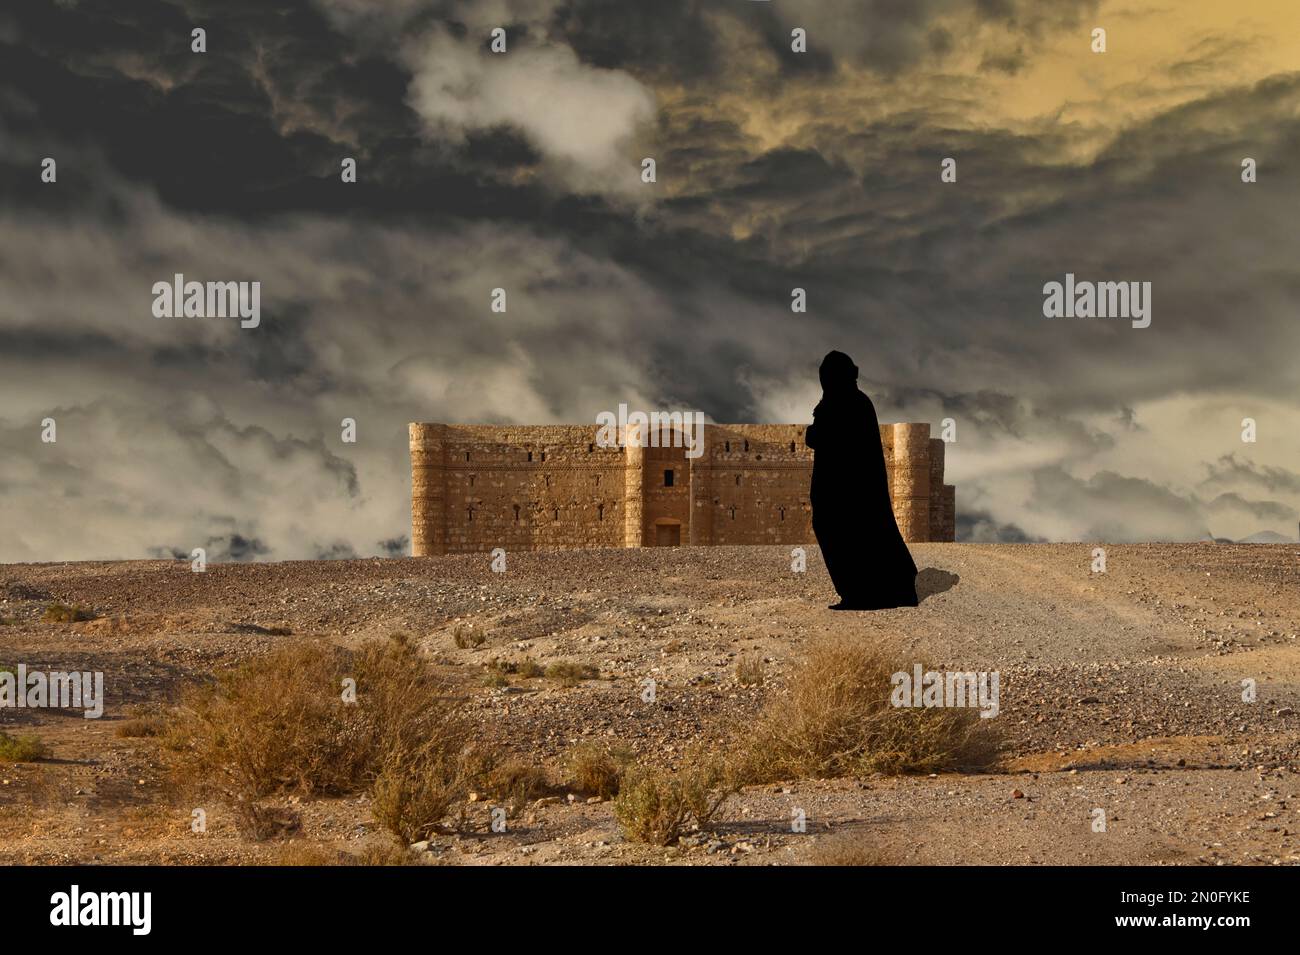 Arabic woman in black against the old castle and the cloudy weather in the desert Stock Photo